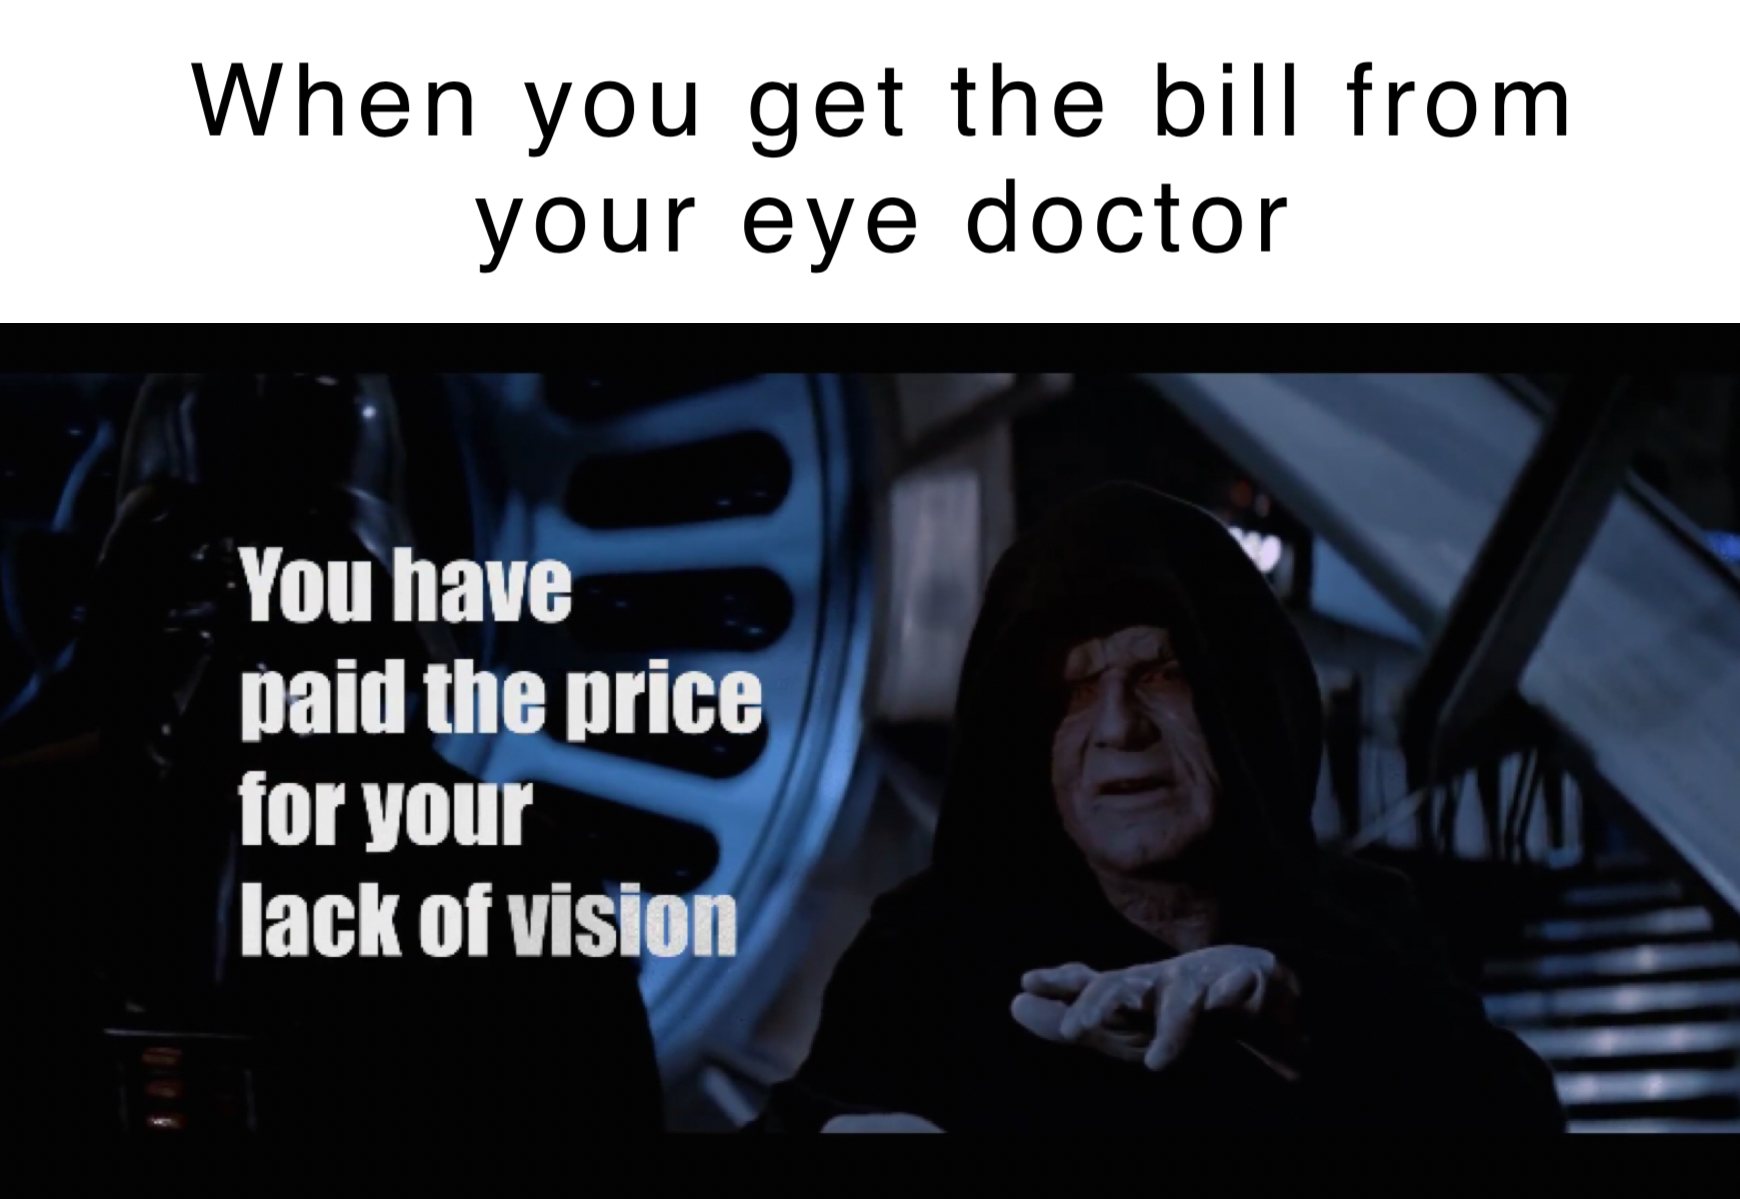 star wars lack of vision - When you get the bill from your eye doctor You have paid the price for your lack of vision